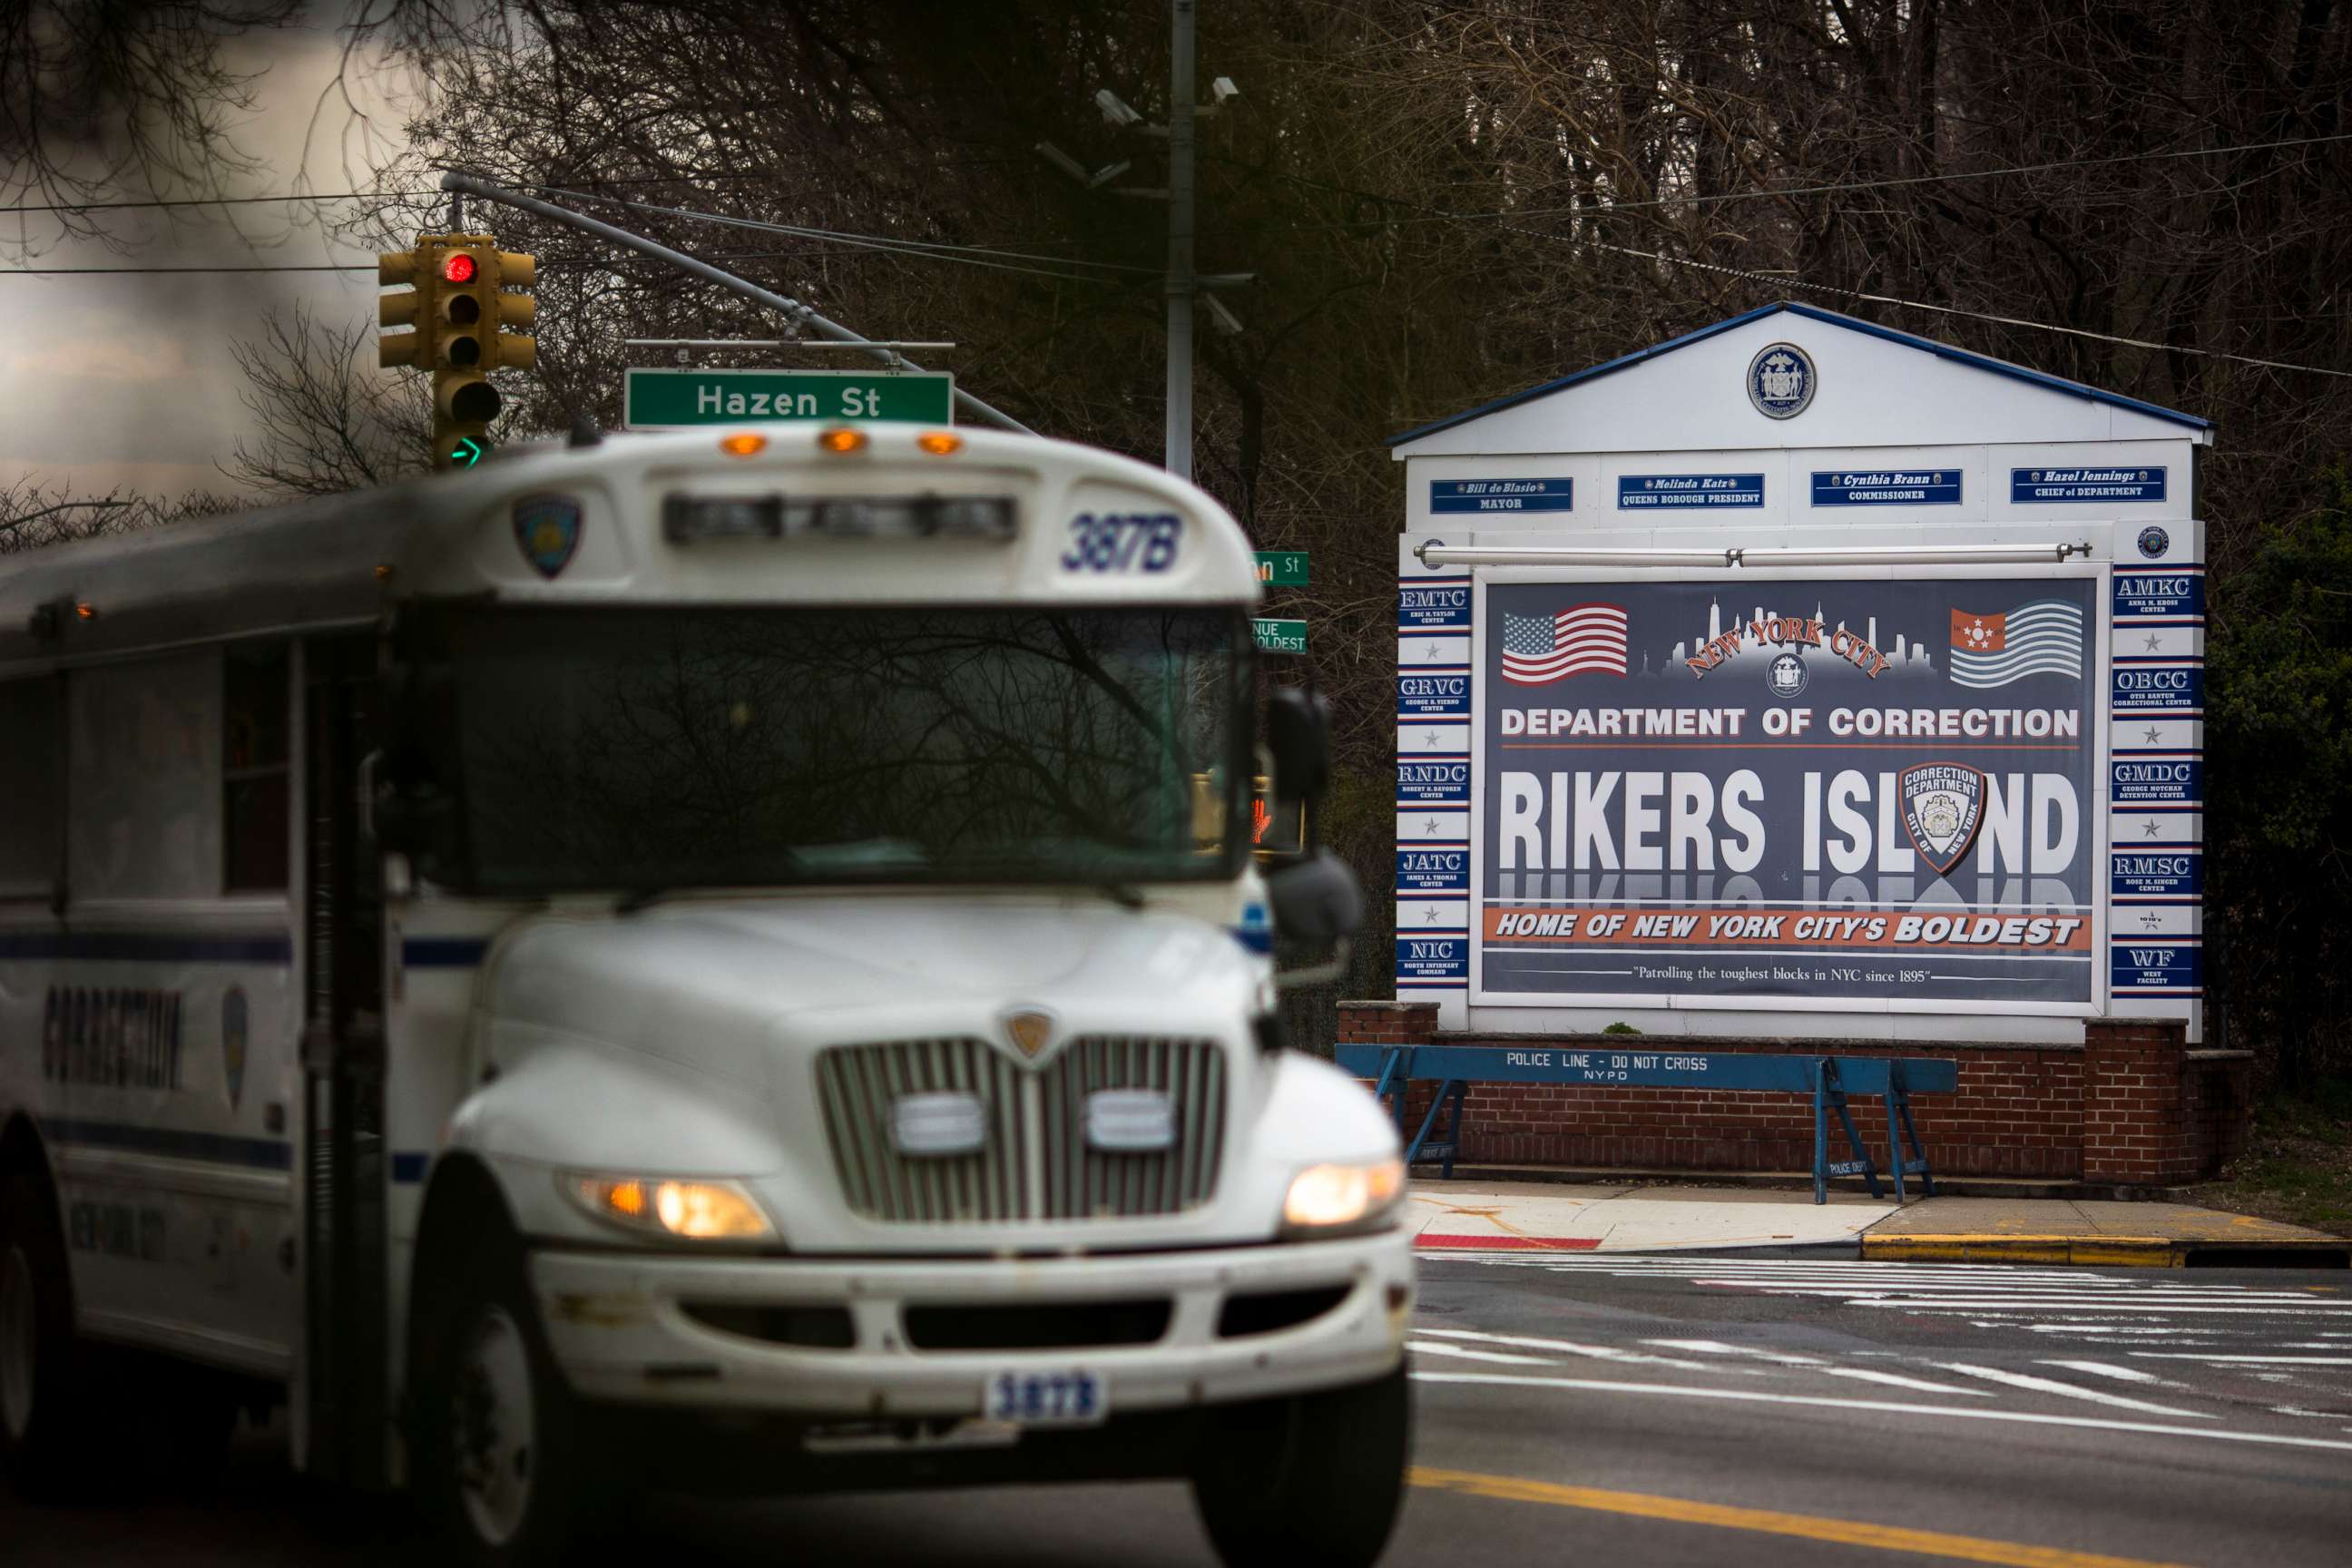 PHOTO: A bus passes the entrance to the Rikers Island jail complex in New York, March 20, 2020.